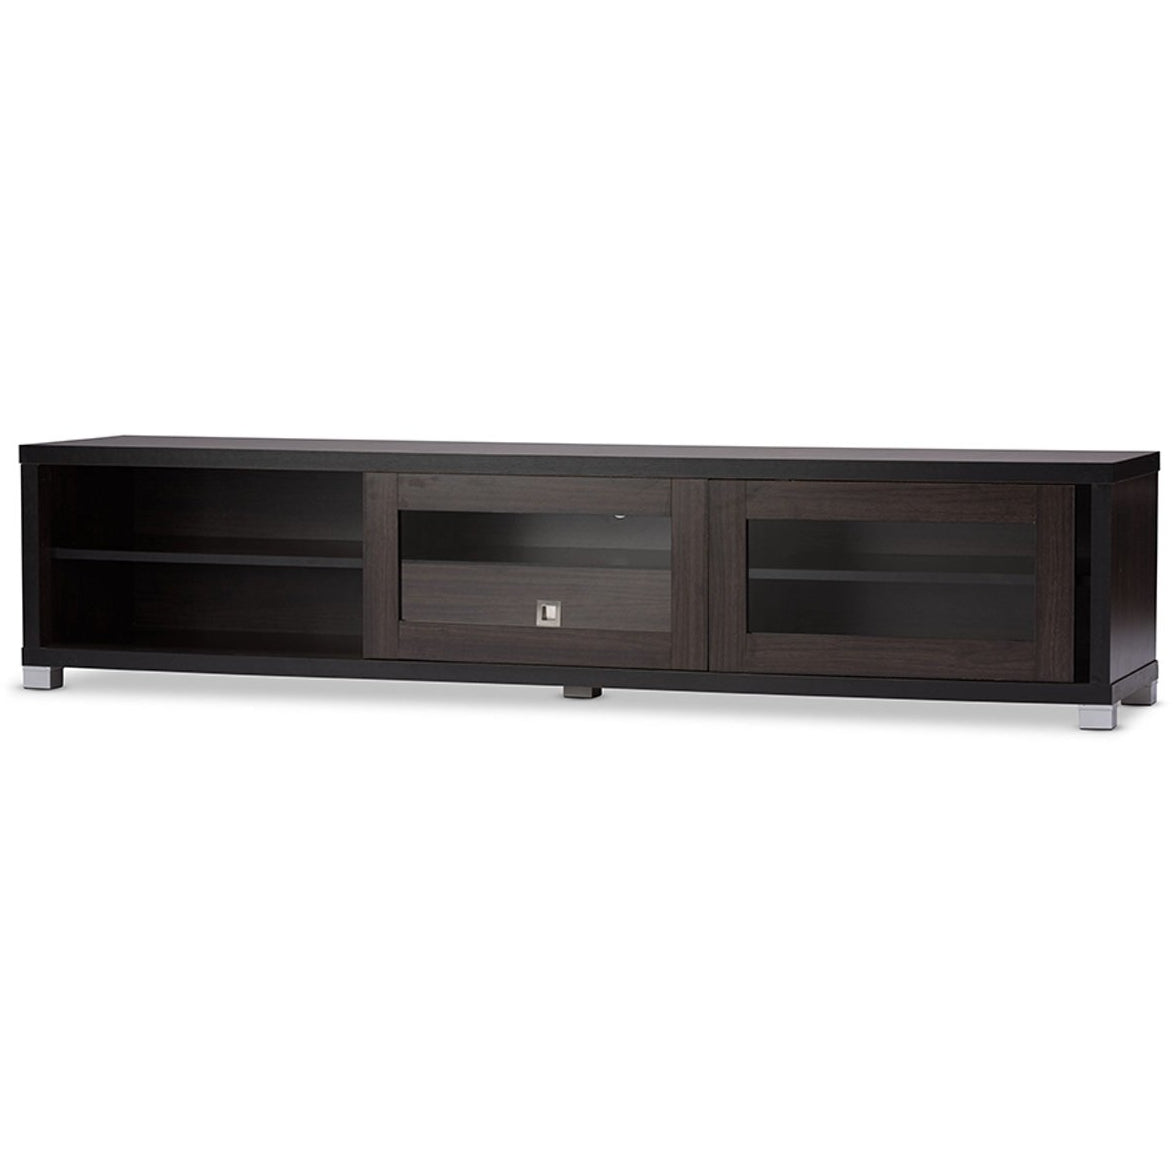 Baxton Studio Beasley 70-Inch Dark Brown TV Cabinet with 2 Sliding Doors and Drawer Baxton Studio-TV Stands-Minimal And Modern - 3